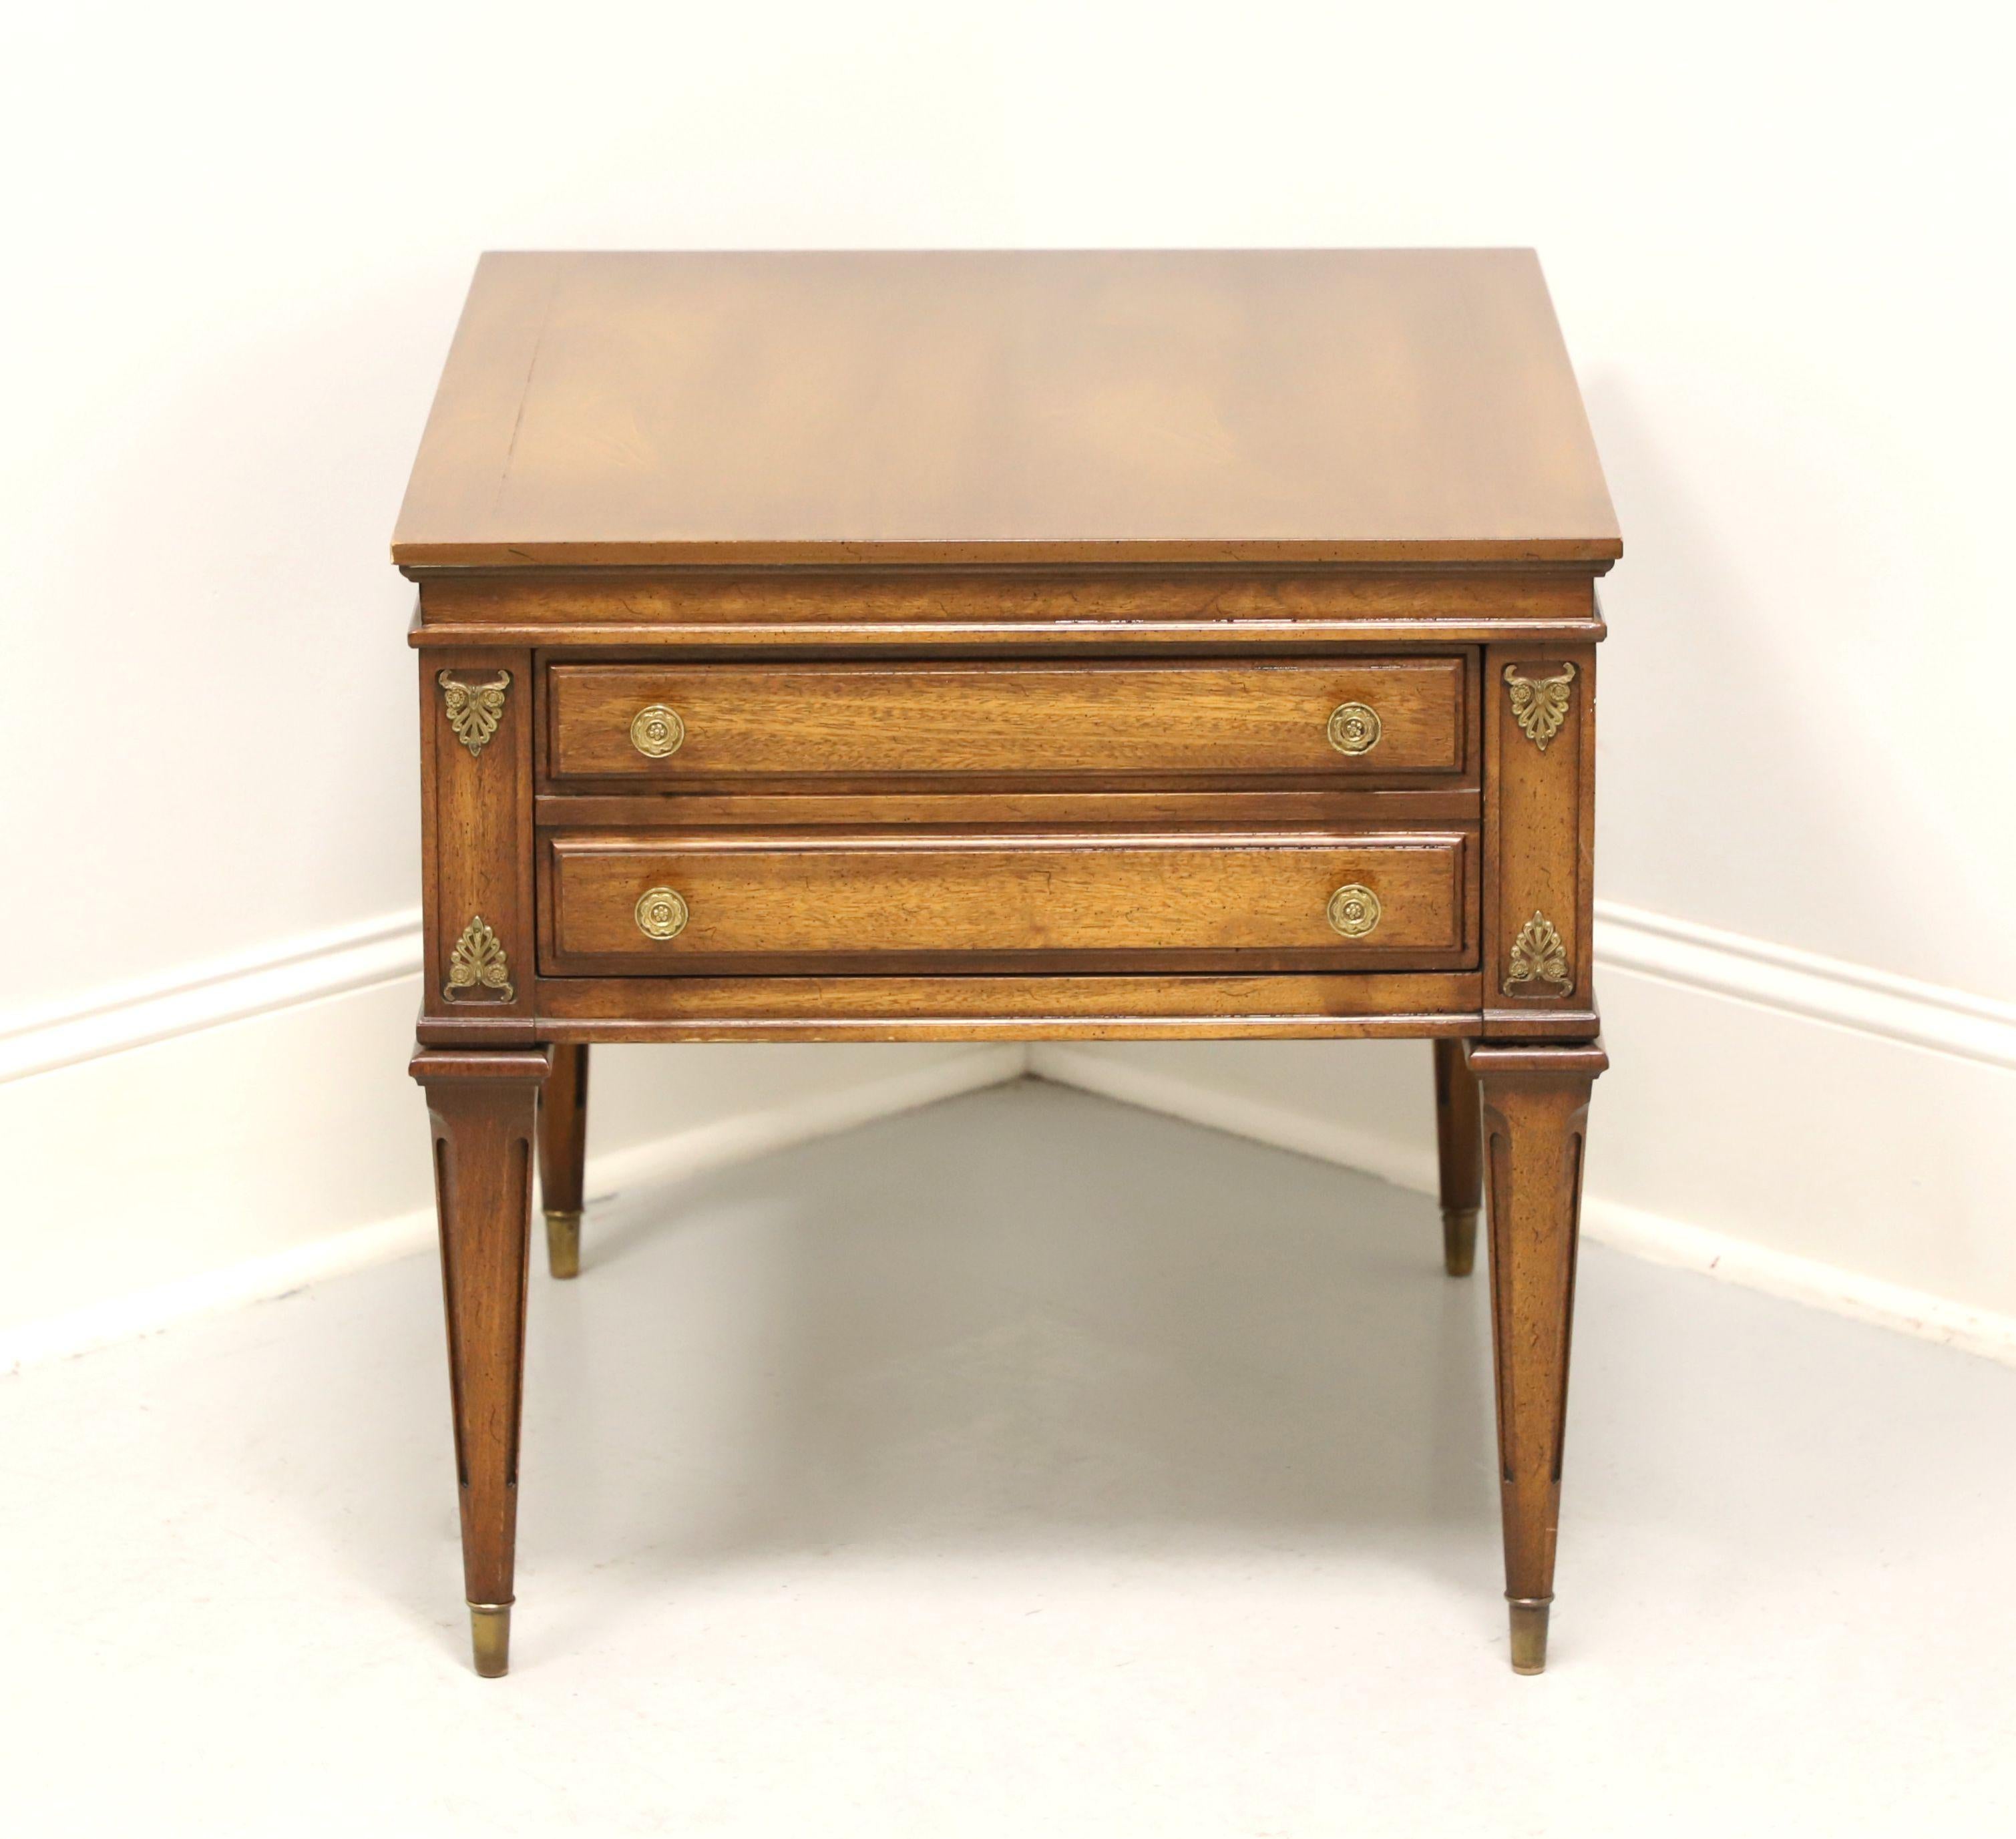 A mid 20th century side table by Weiman, from their Rockwood Collection. Mahogany with a lighter color finish, classic mid 20th Century styling, banded top, brass hardware & ornamentation, and straight tapered legs with brass caps. Features one